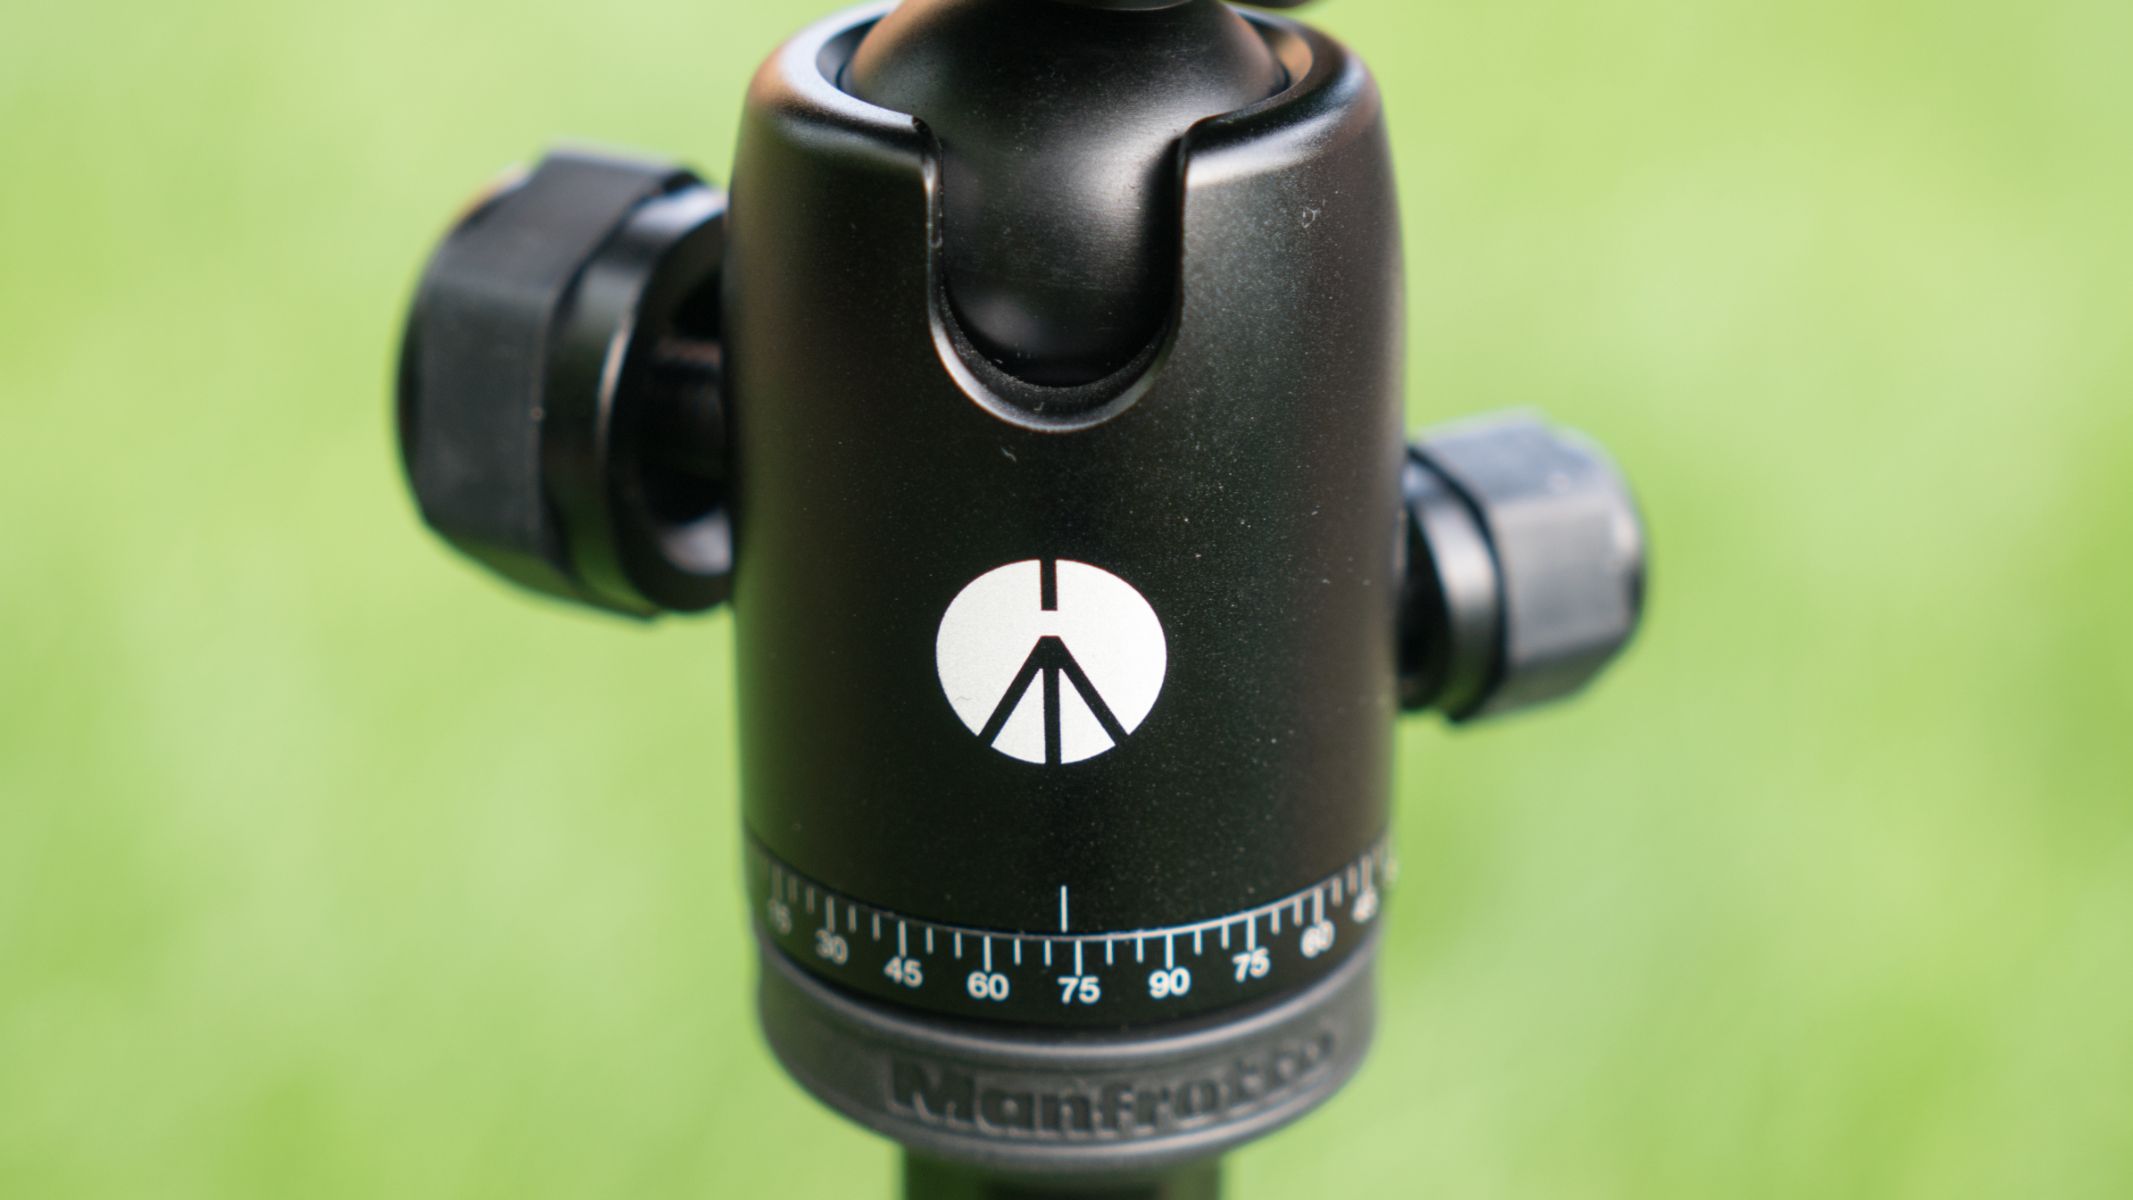 The tripod head with panning meters